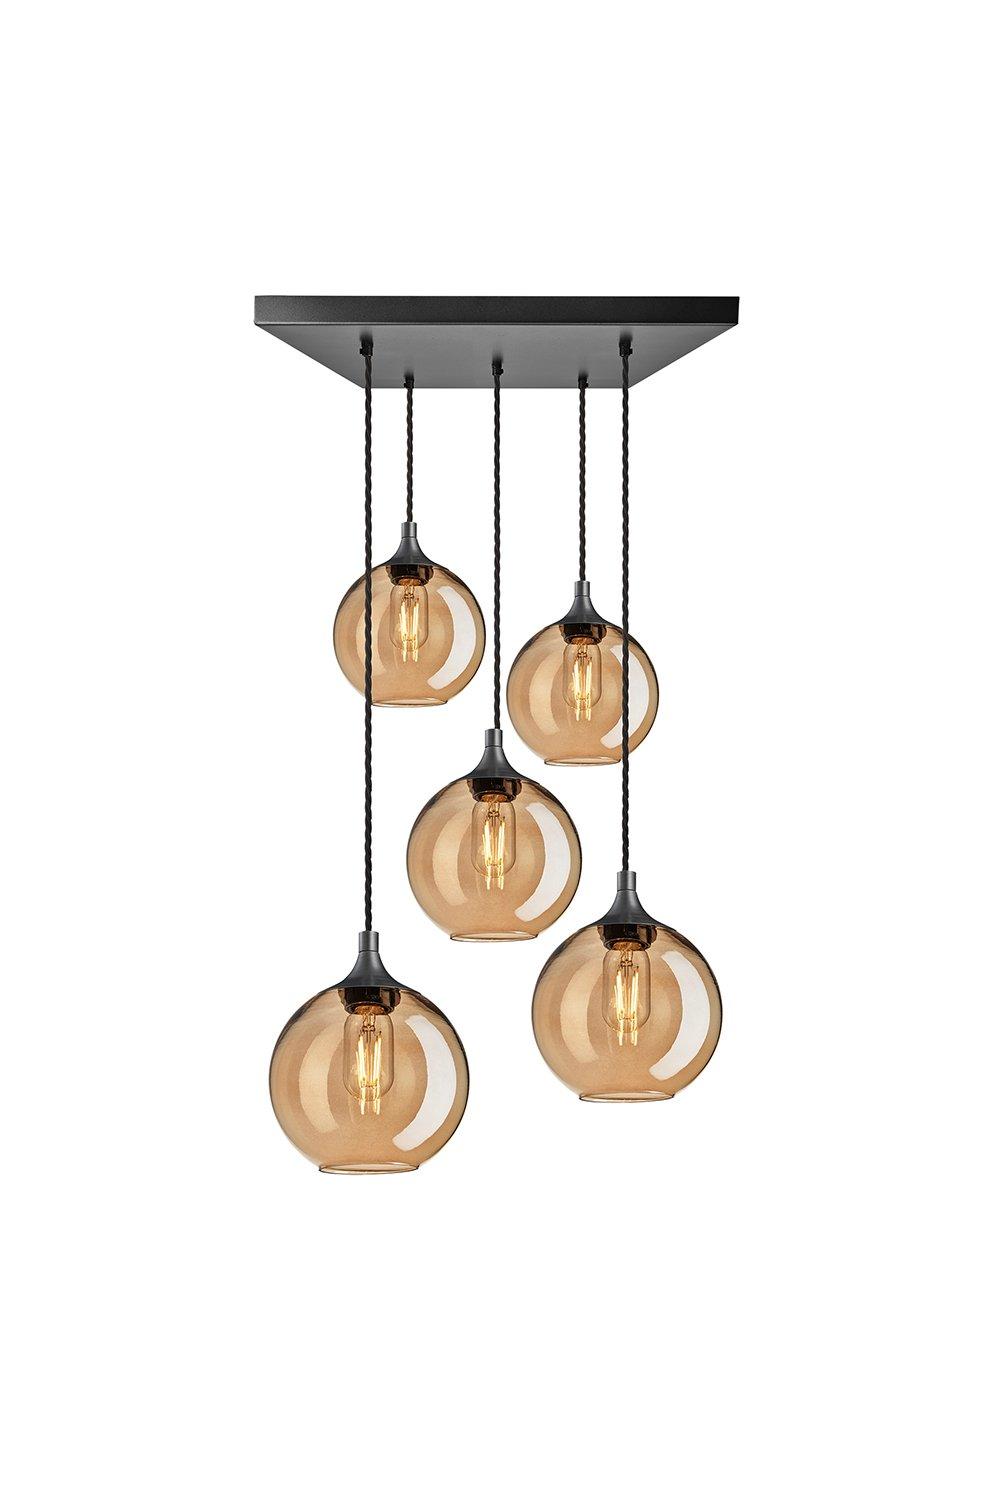 Chelsea Tinted Glass Globe 5 Wire Square Cluster Lights, 7 inch, Amber, Pewter holder